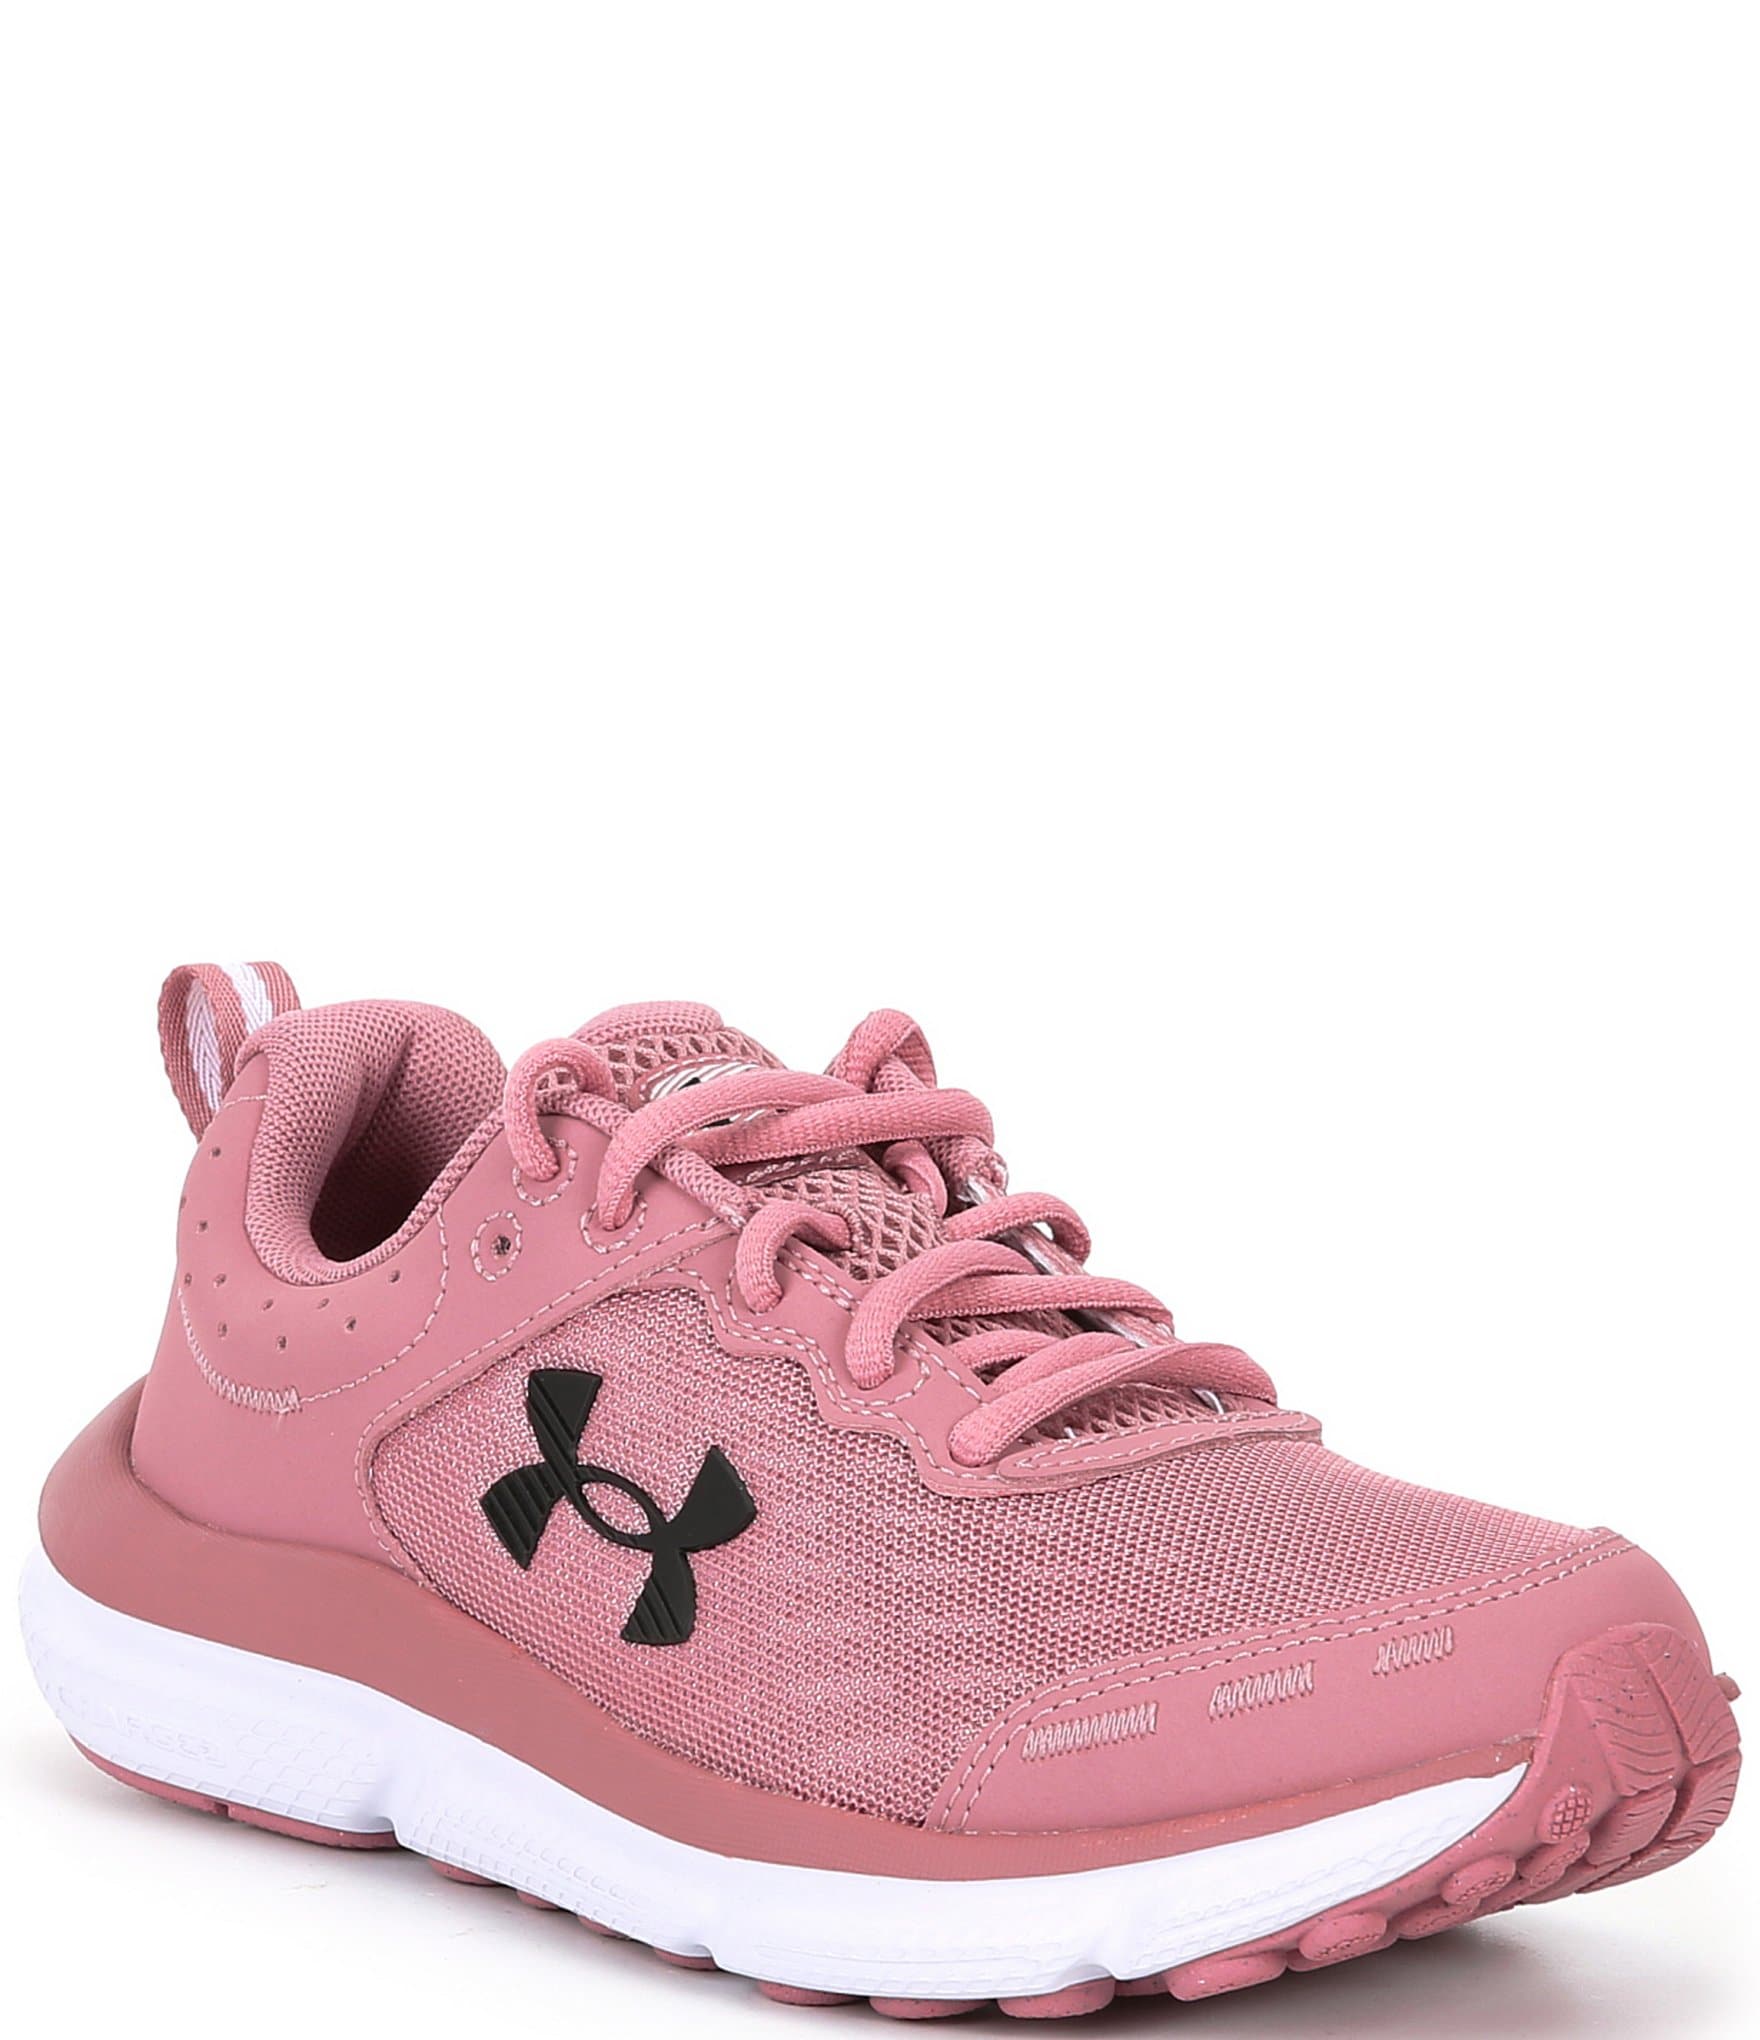 Under Armour Women's Charged Assert 10 Running Sneakers